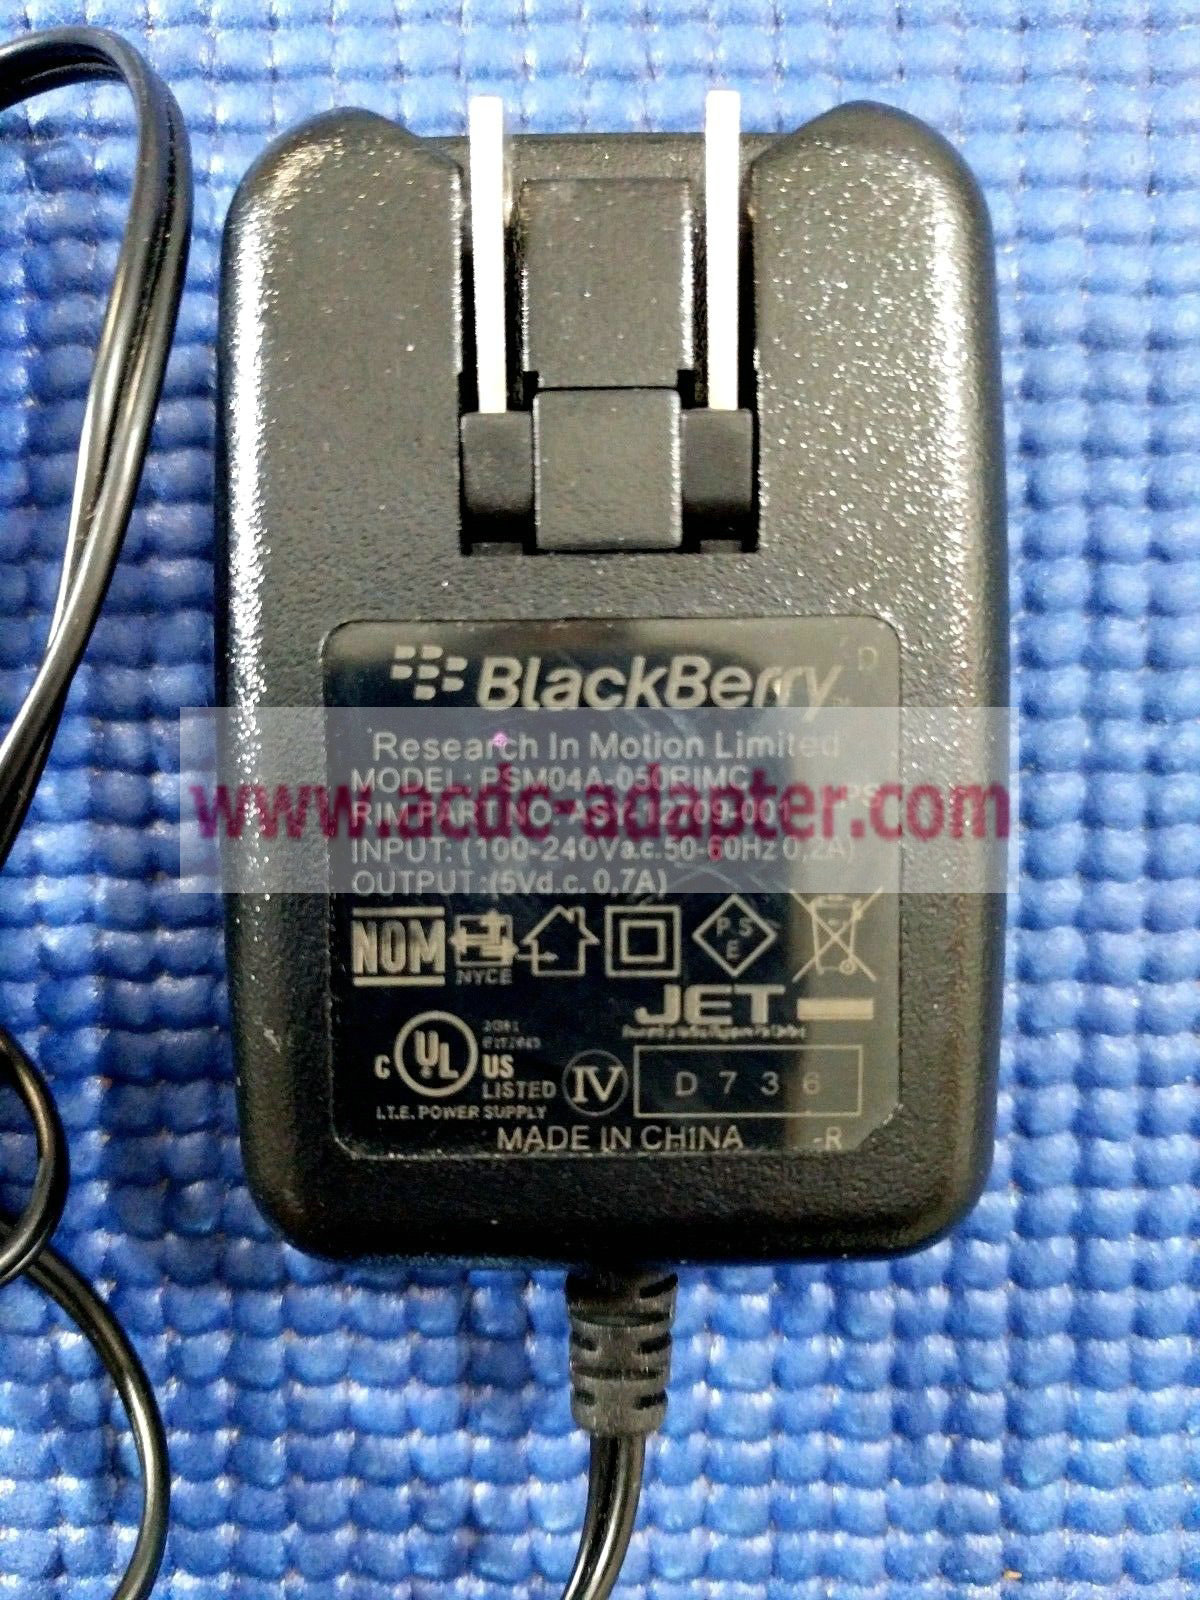 New DC 5V 700mA Blackberry ASY-12709-001 USB Wall Charger AC Adapter